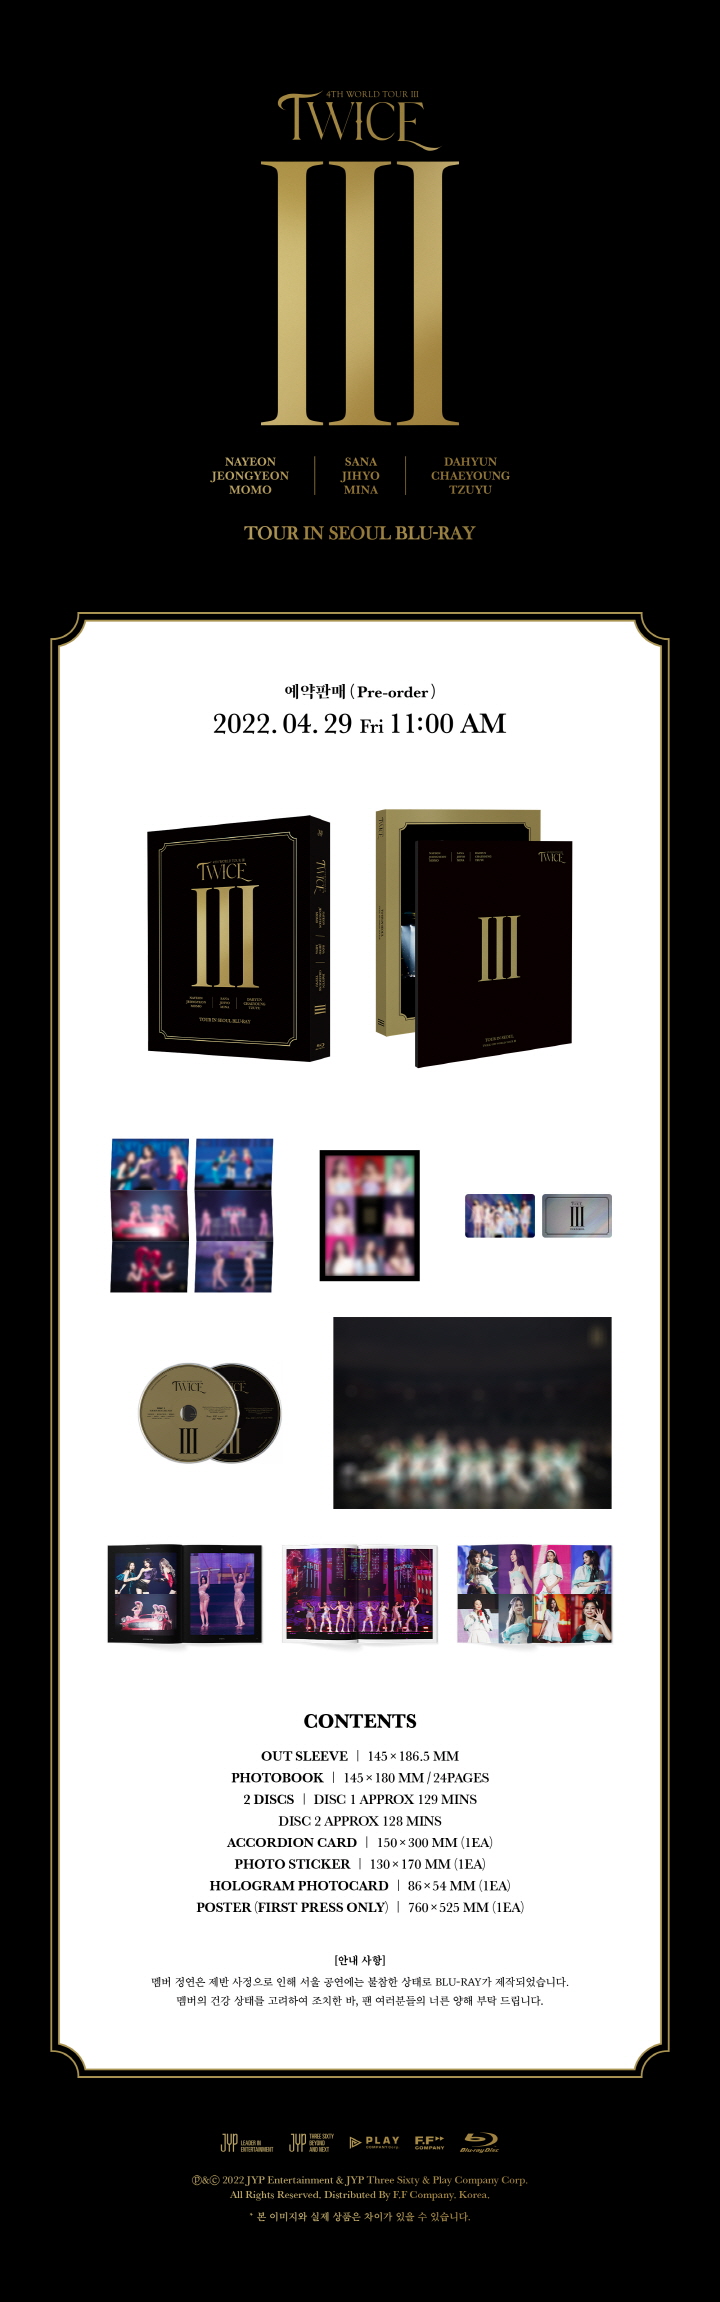 TWICE  4TH WORLD TOUR Ⅲ IN SEOUL  BLURAY   and  Poster